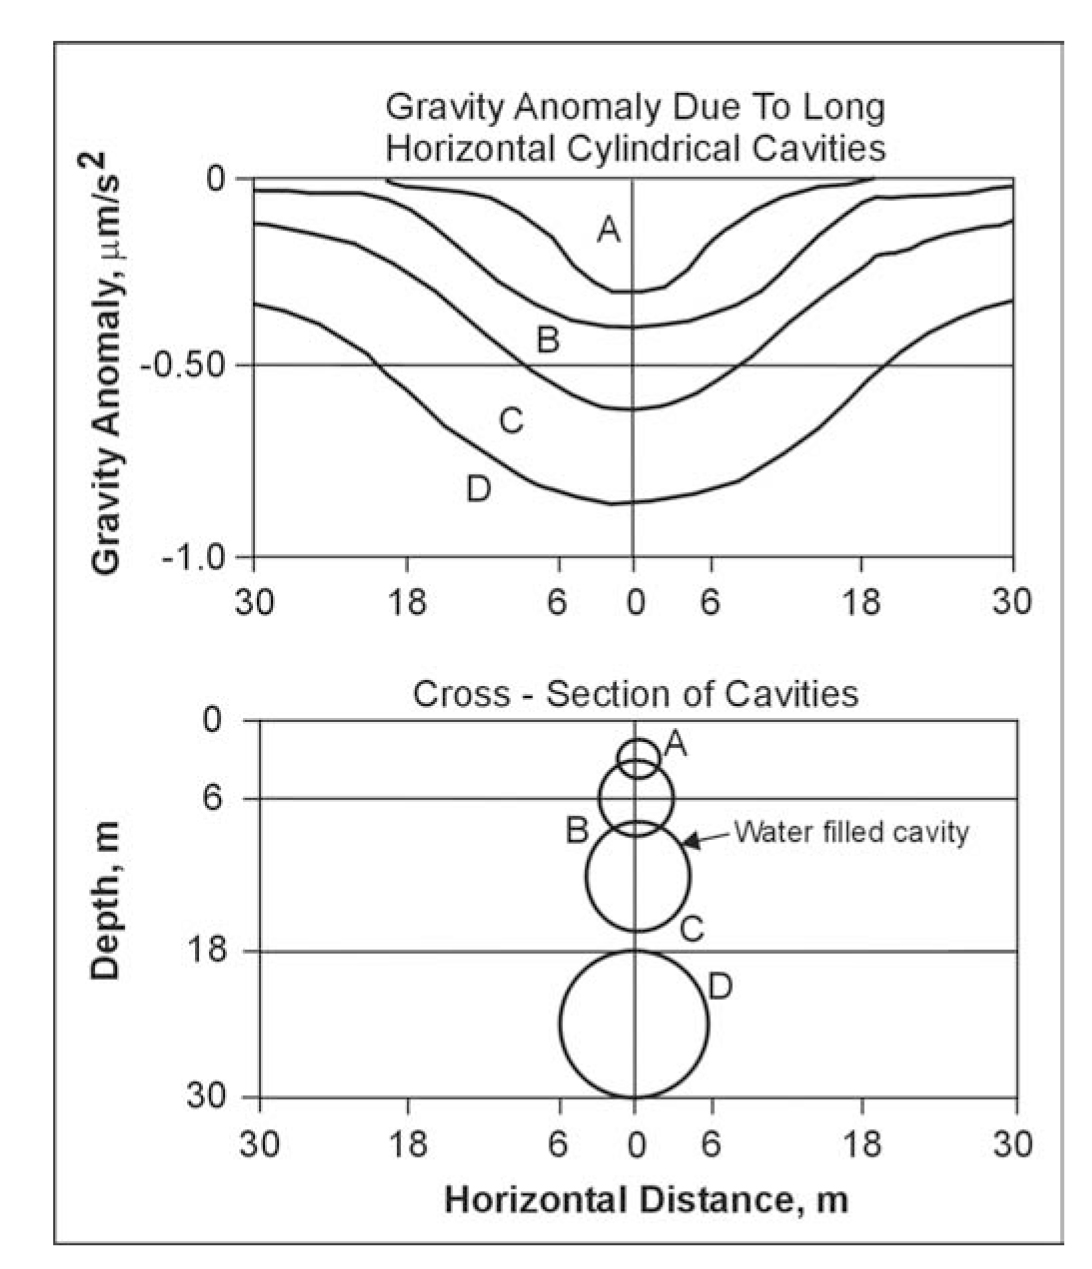 Gravity anomalies for long horizontal cylindrical cavities as a function of depth, size, and distance from peak.